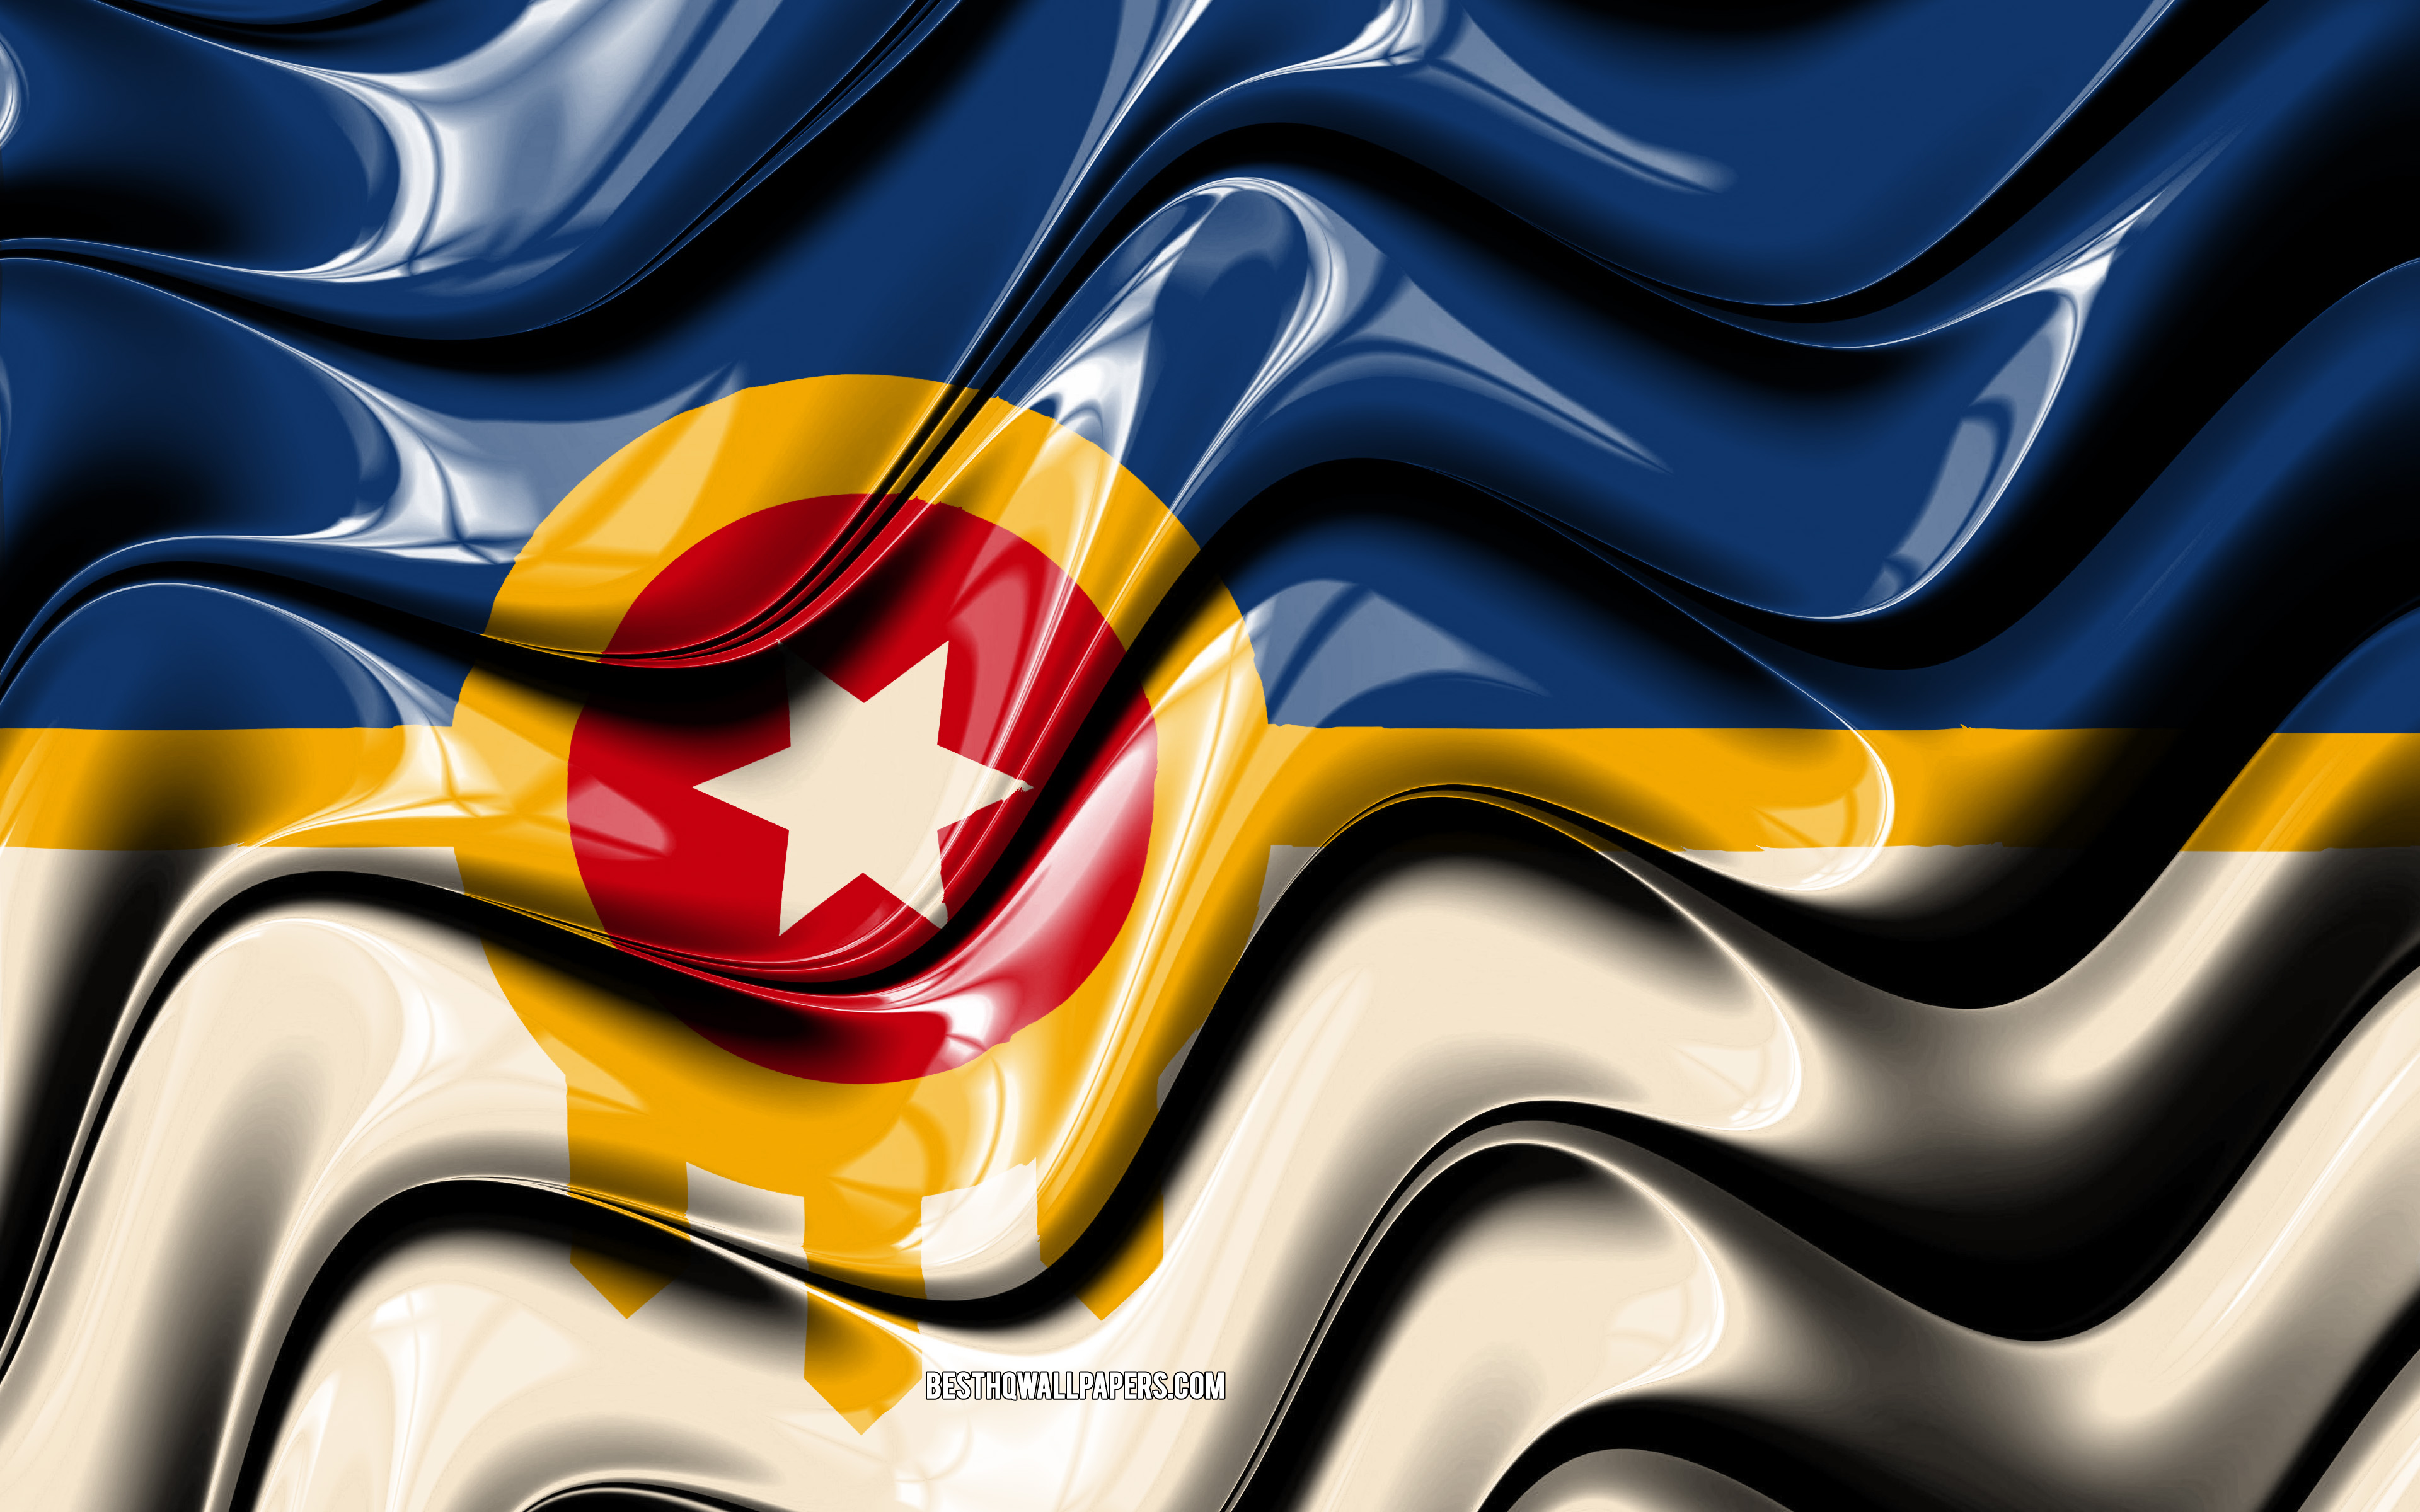 Download wallpaper Tulsa flag, 4k, United States cities